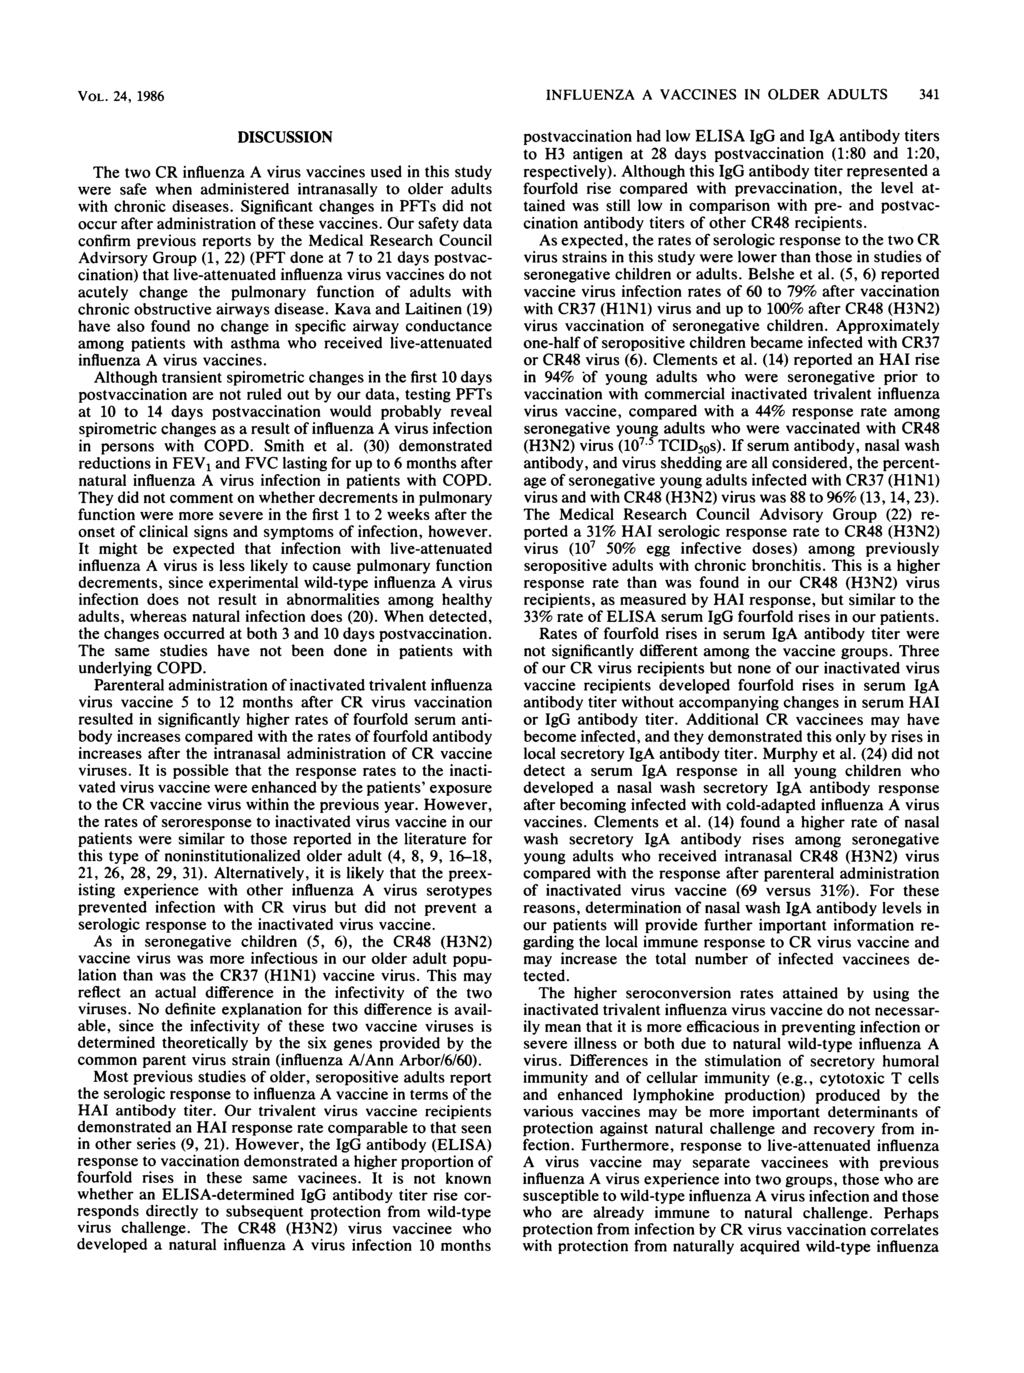 VOL. 24, 1986 DISCUSSION The two CR influenz A virus vccines used in this study were sfe when dministered intrnslly to older dults with chronic diseses.